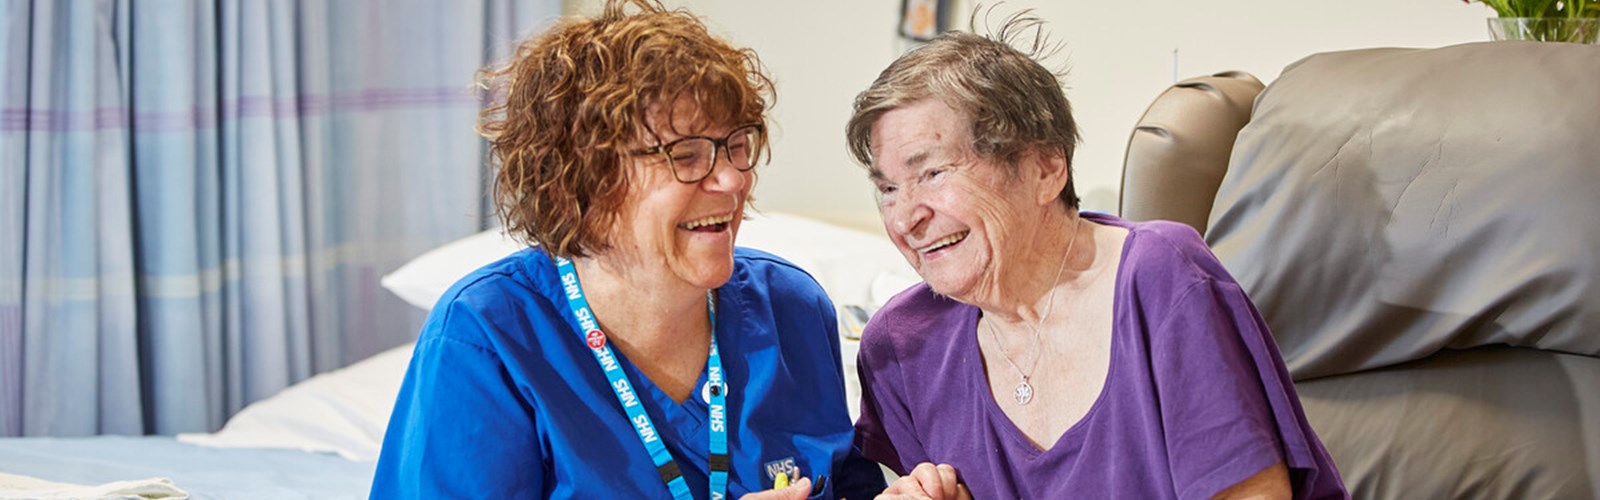 A photo of a nurse, smiling and comforting an older patient, in an inpatient ward